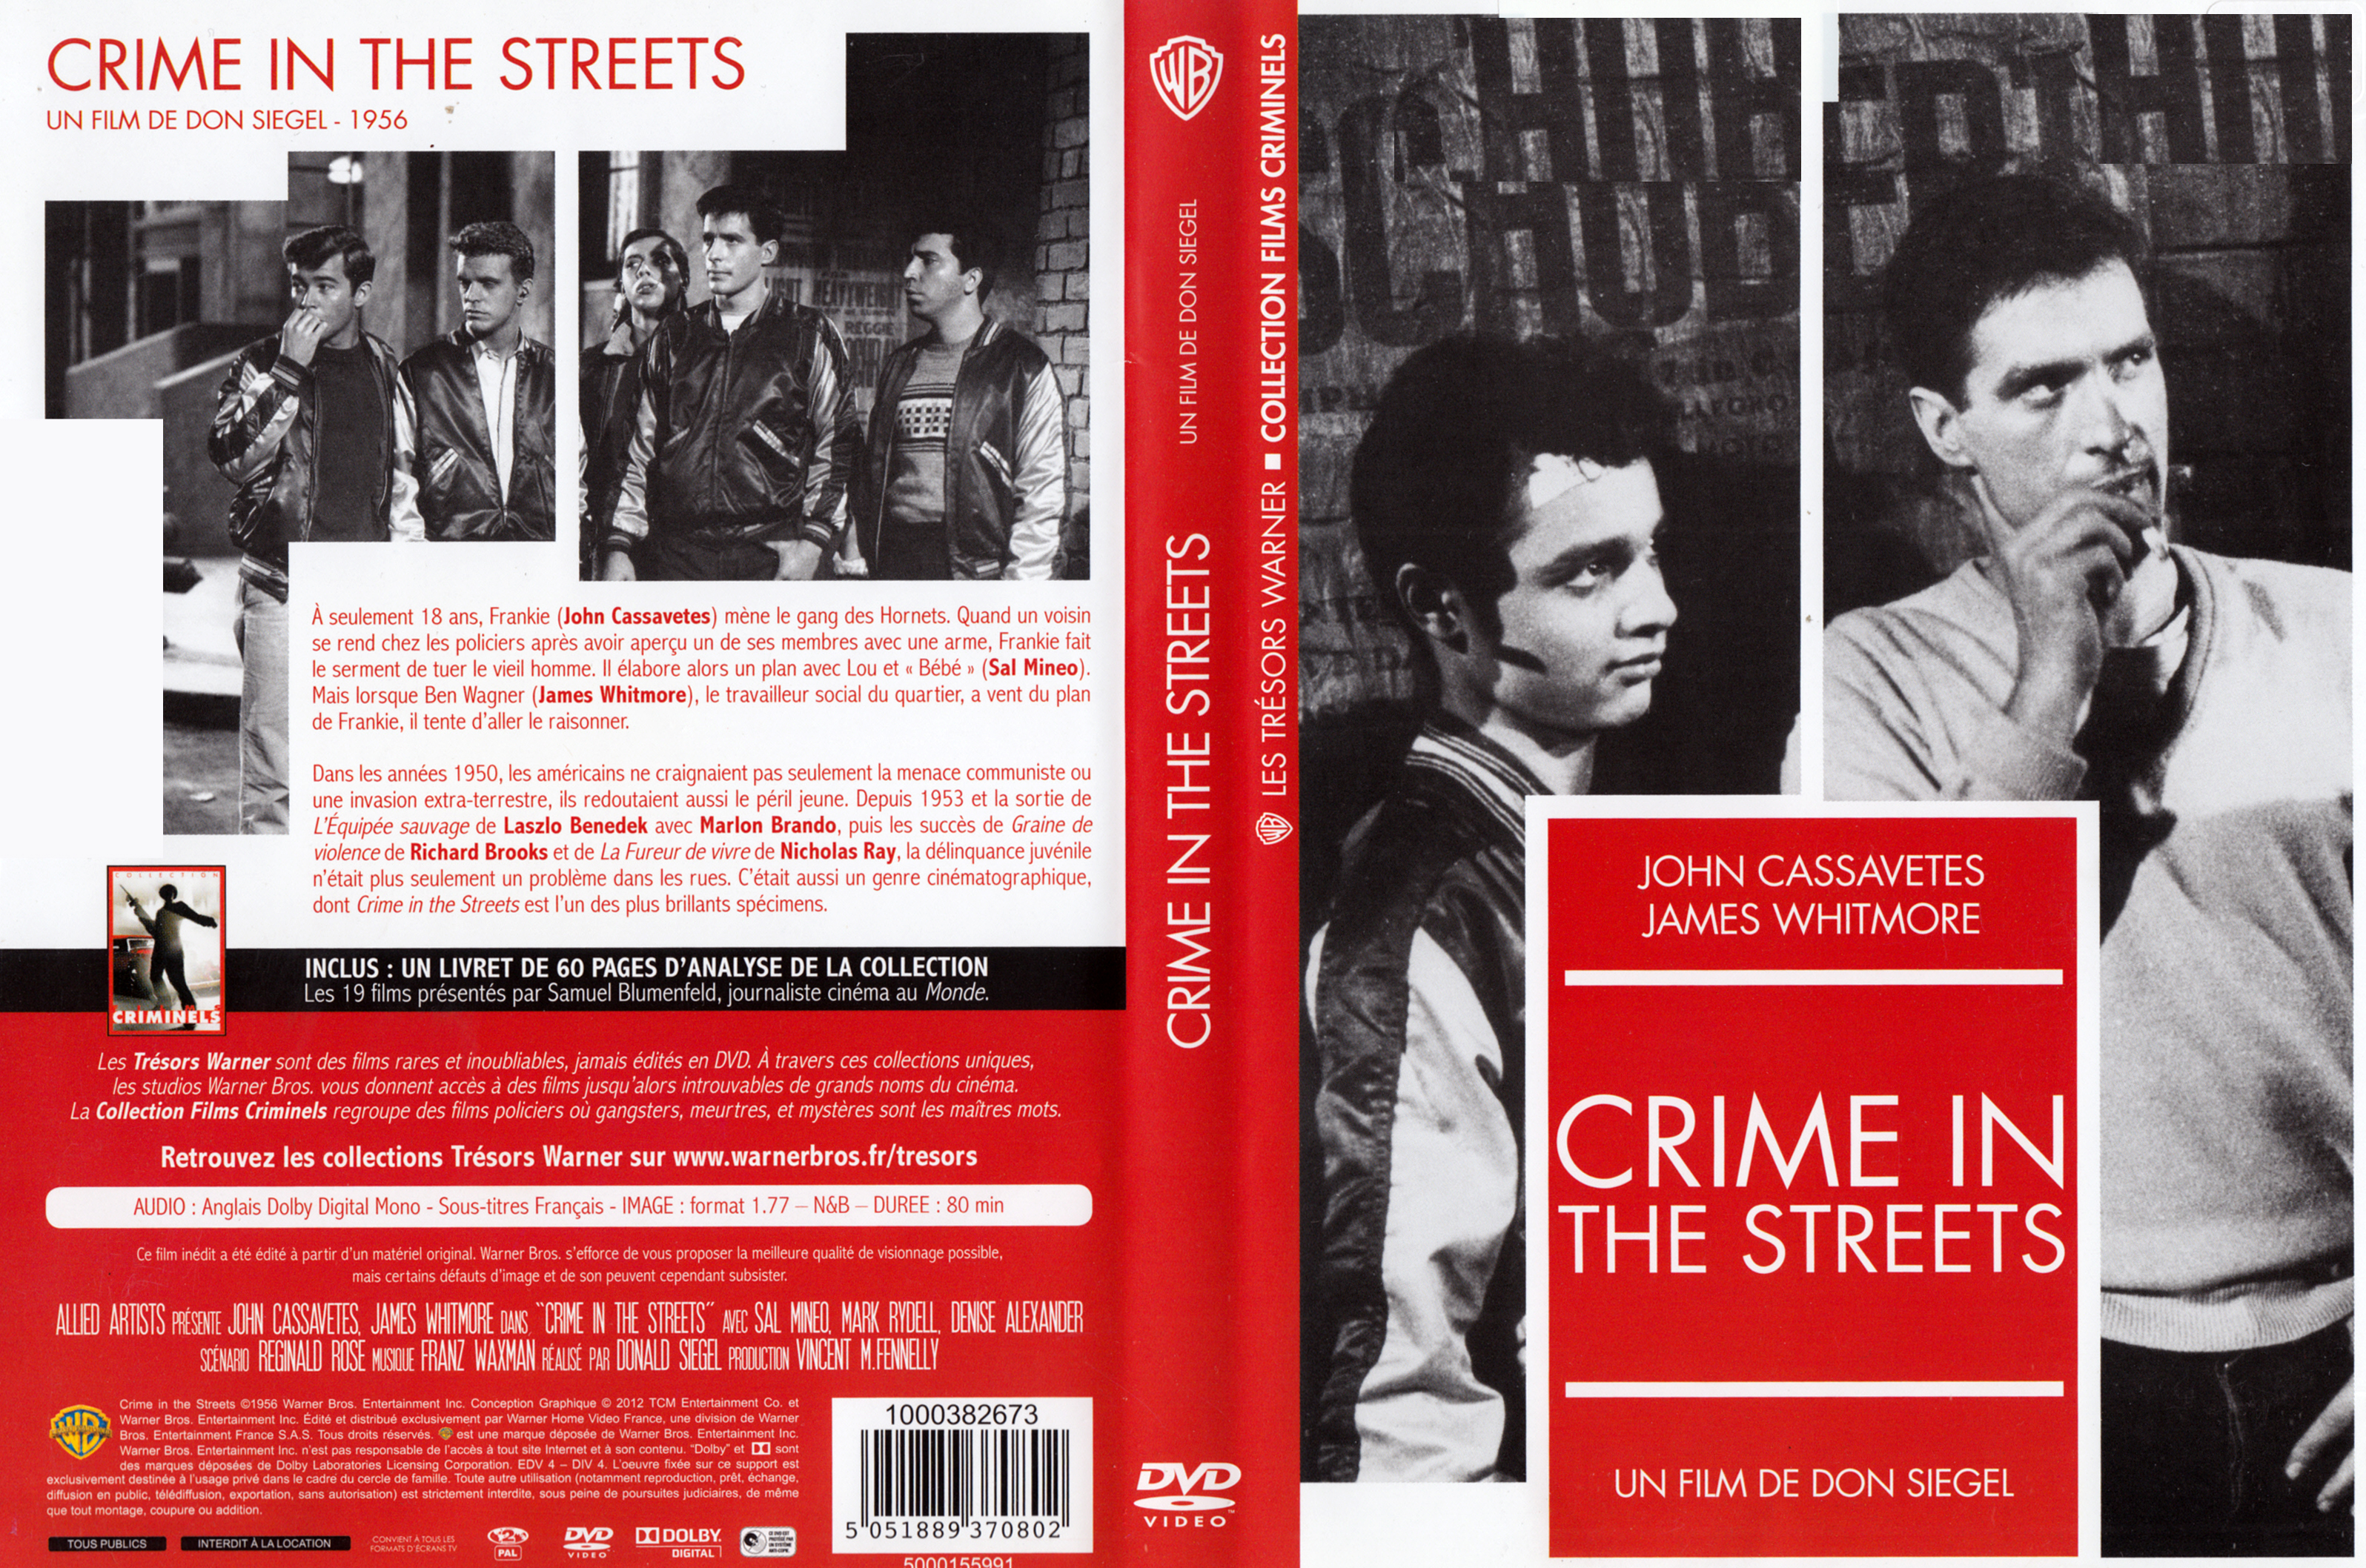 Jaquette DVD Crime in the street